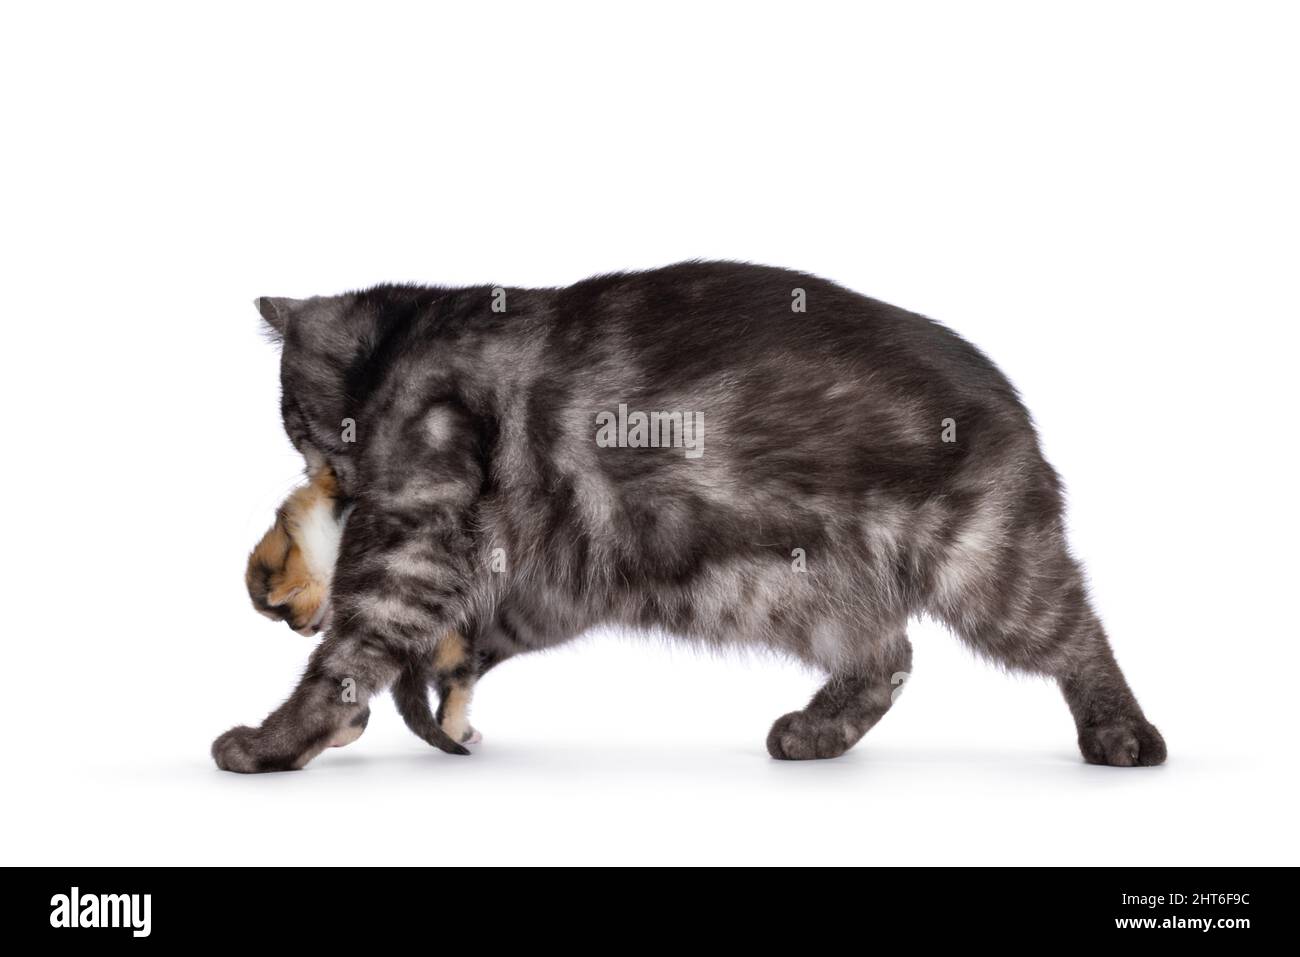 Mother British Shorthai cat walking away with kitten in mouth. Isolated on a white background. Stock Photo